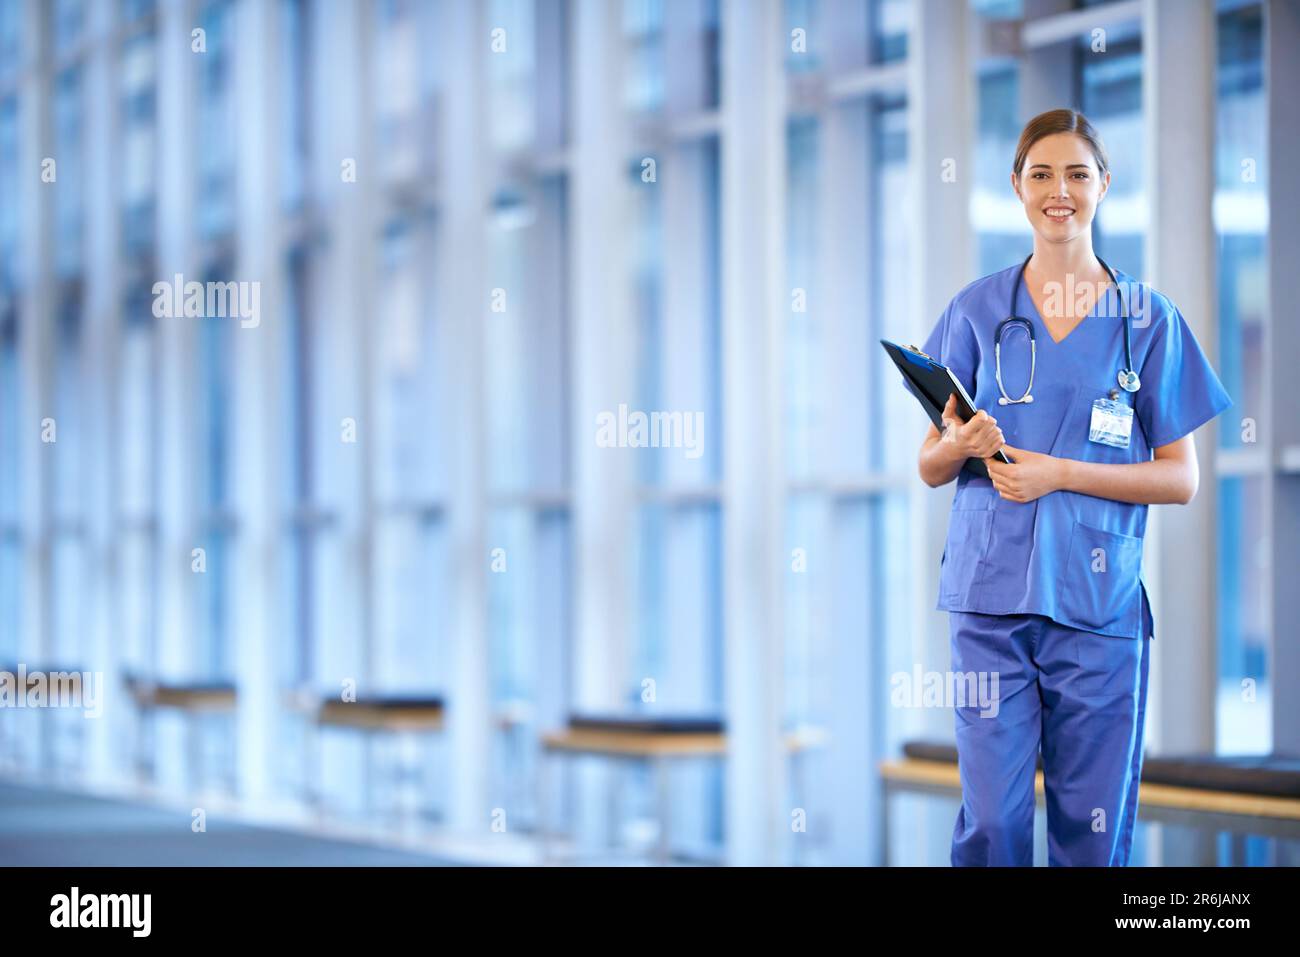 Healthcare, portrait of woman doctor and clipboard standing in a hospital smiling for protection. Nursing, health wellness female nurse or surgeon Stock Photo